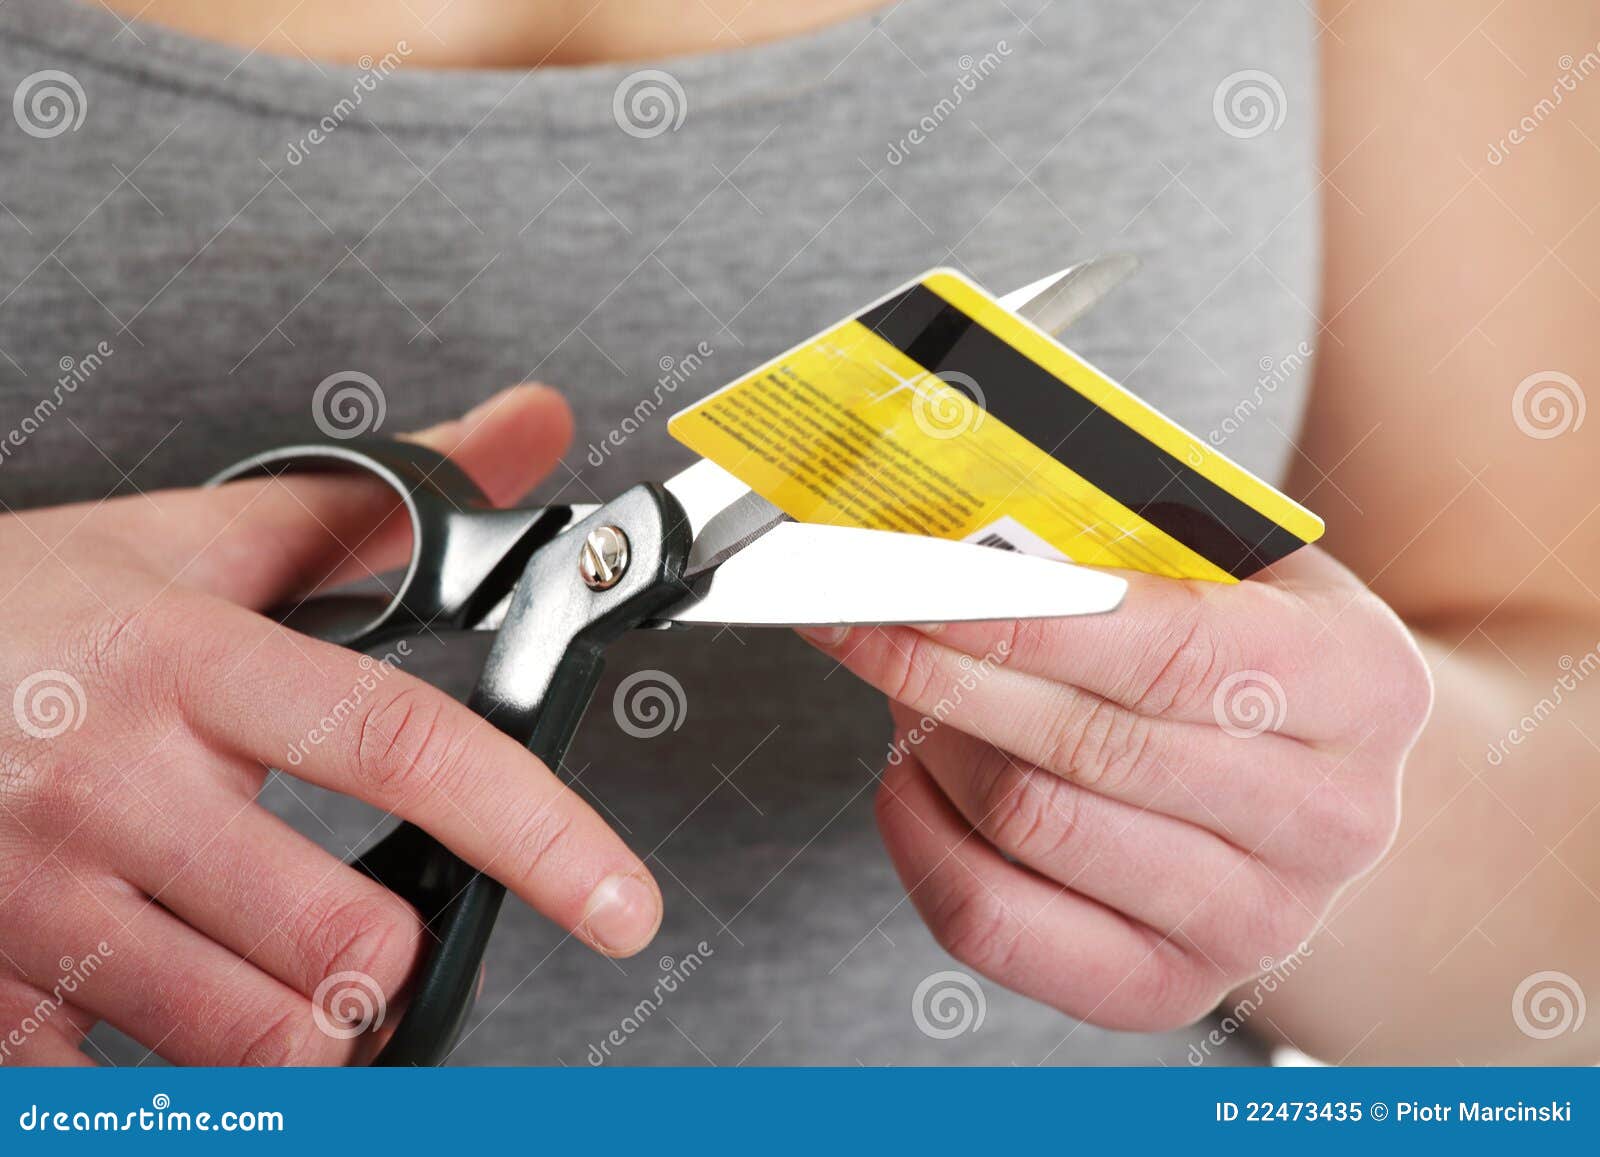 woman has to destroy her credit card